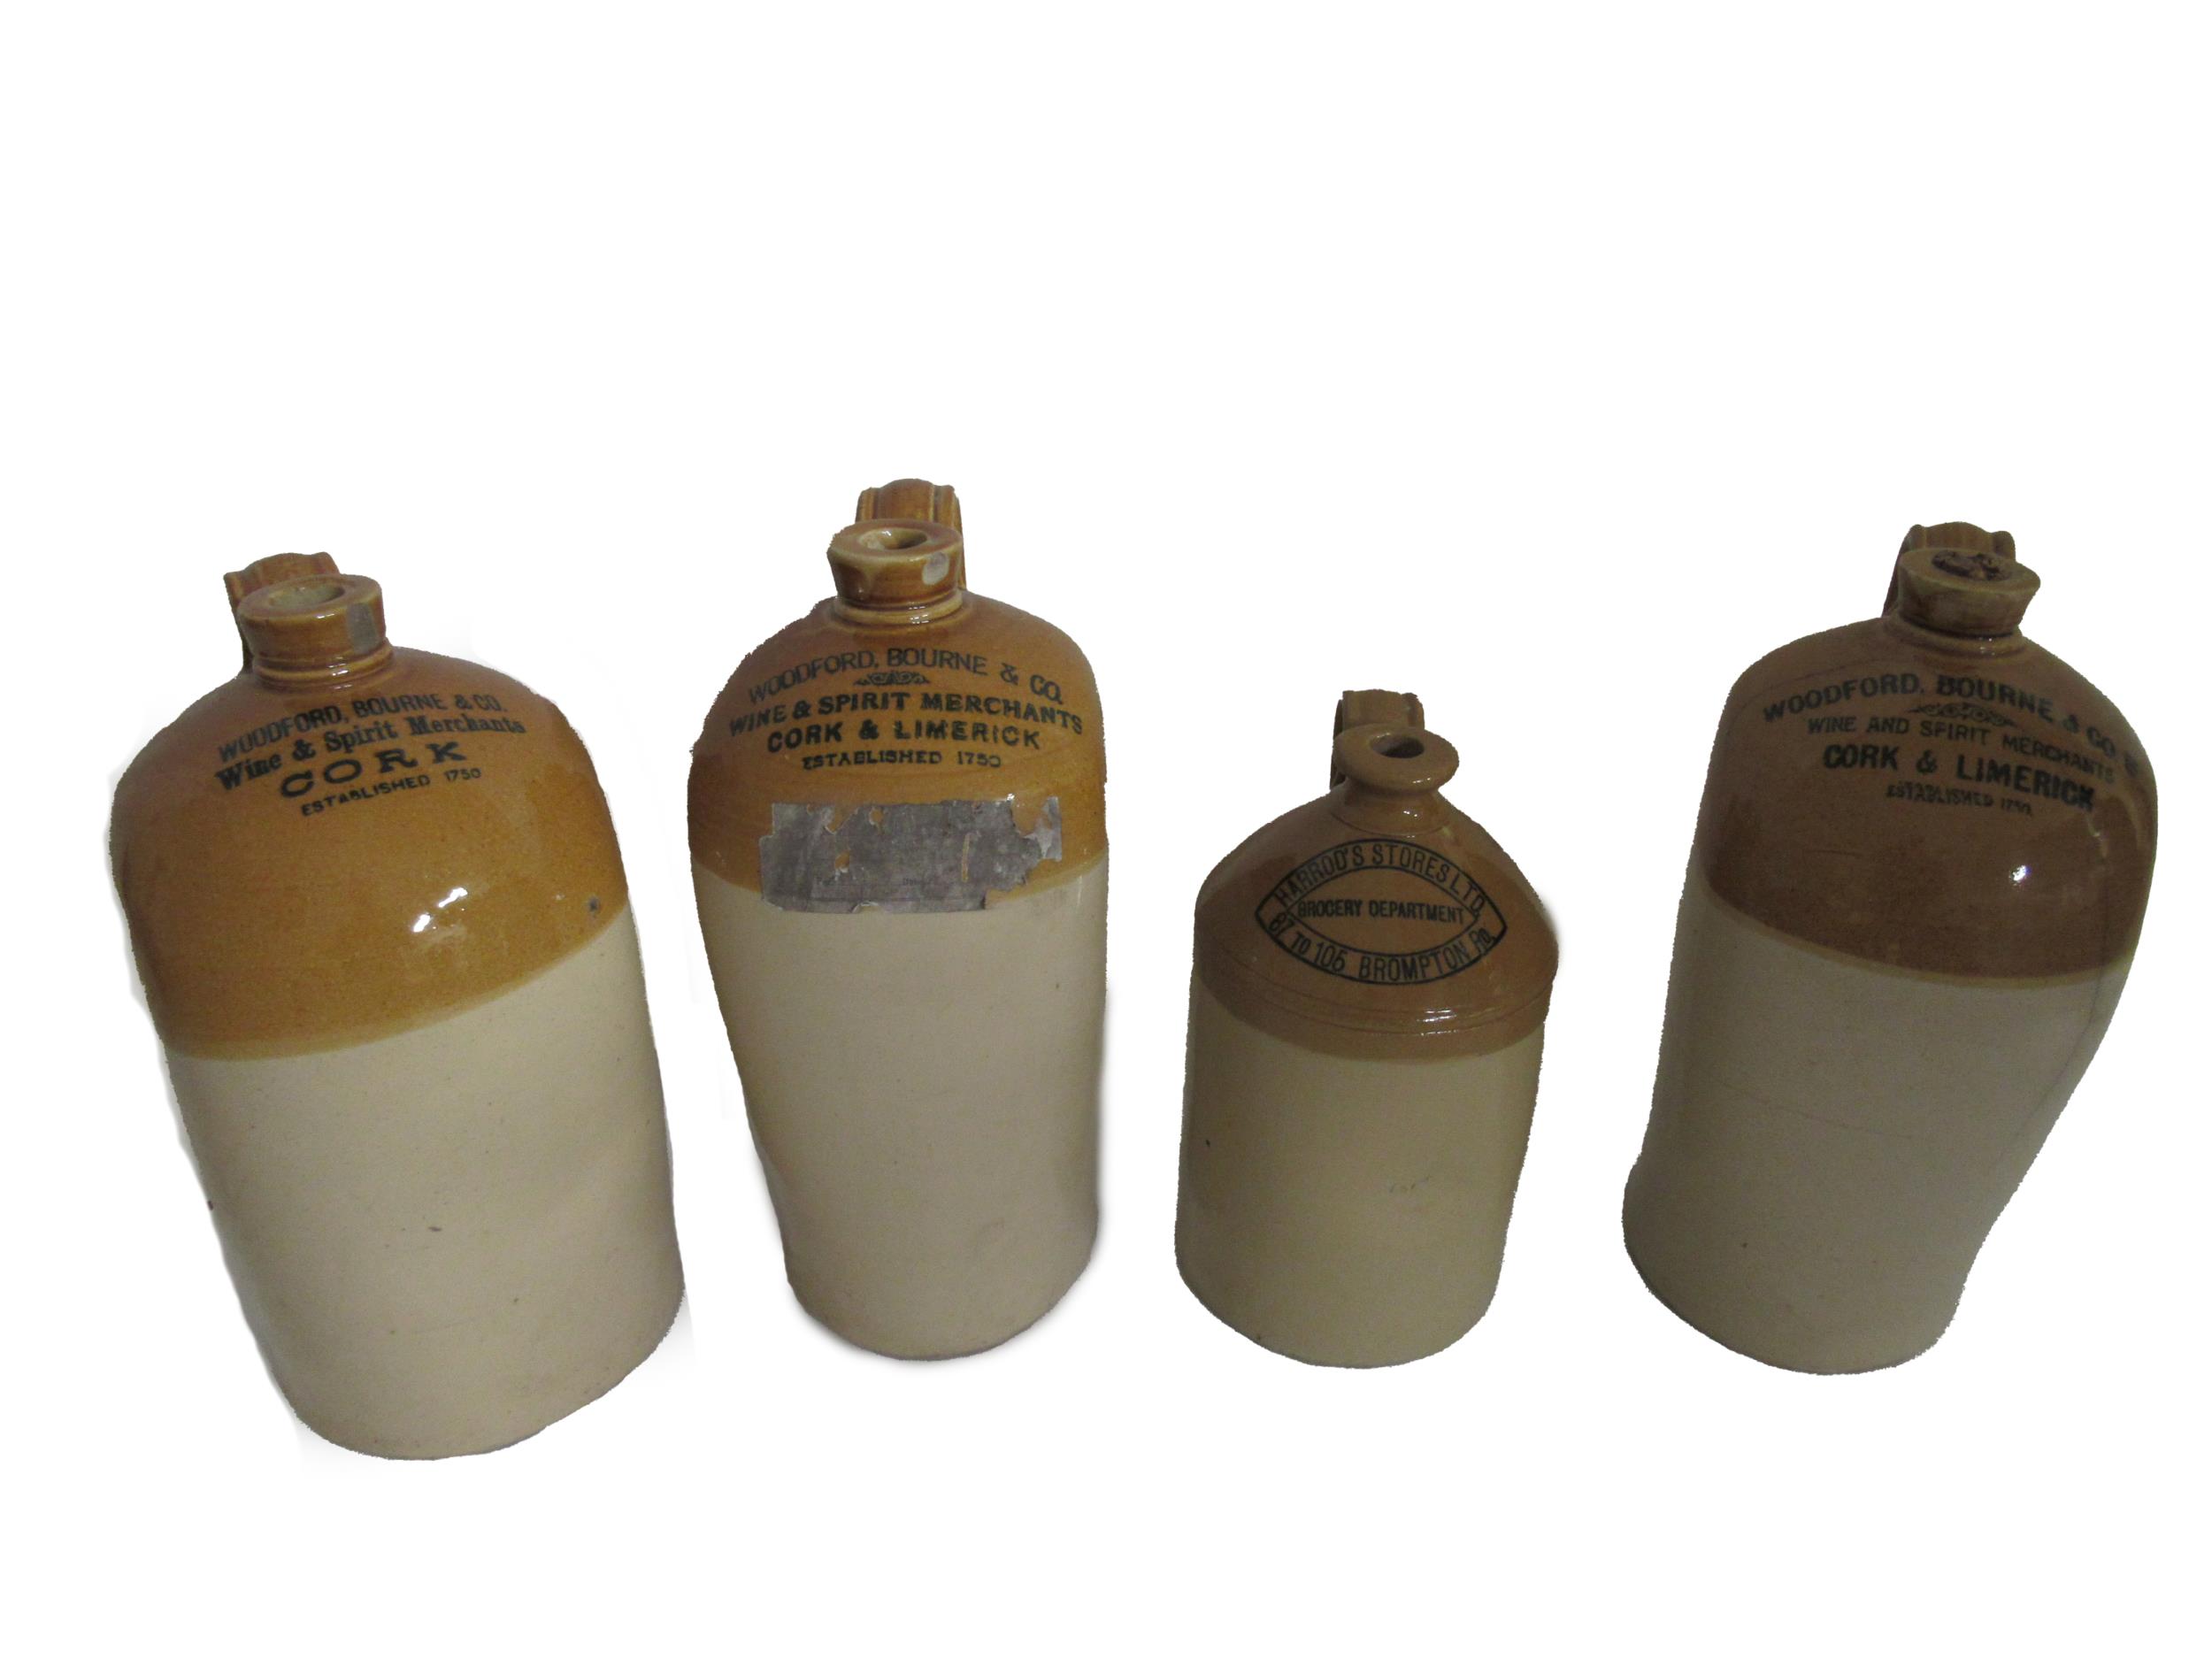 A collection of 4 Earthenware Irish and other Spirit Jars, for Woodford Bourne and Co. Limerick